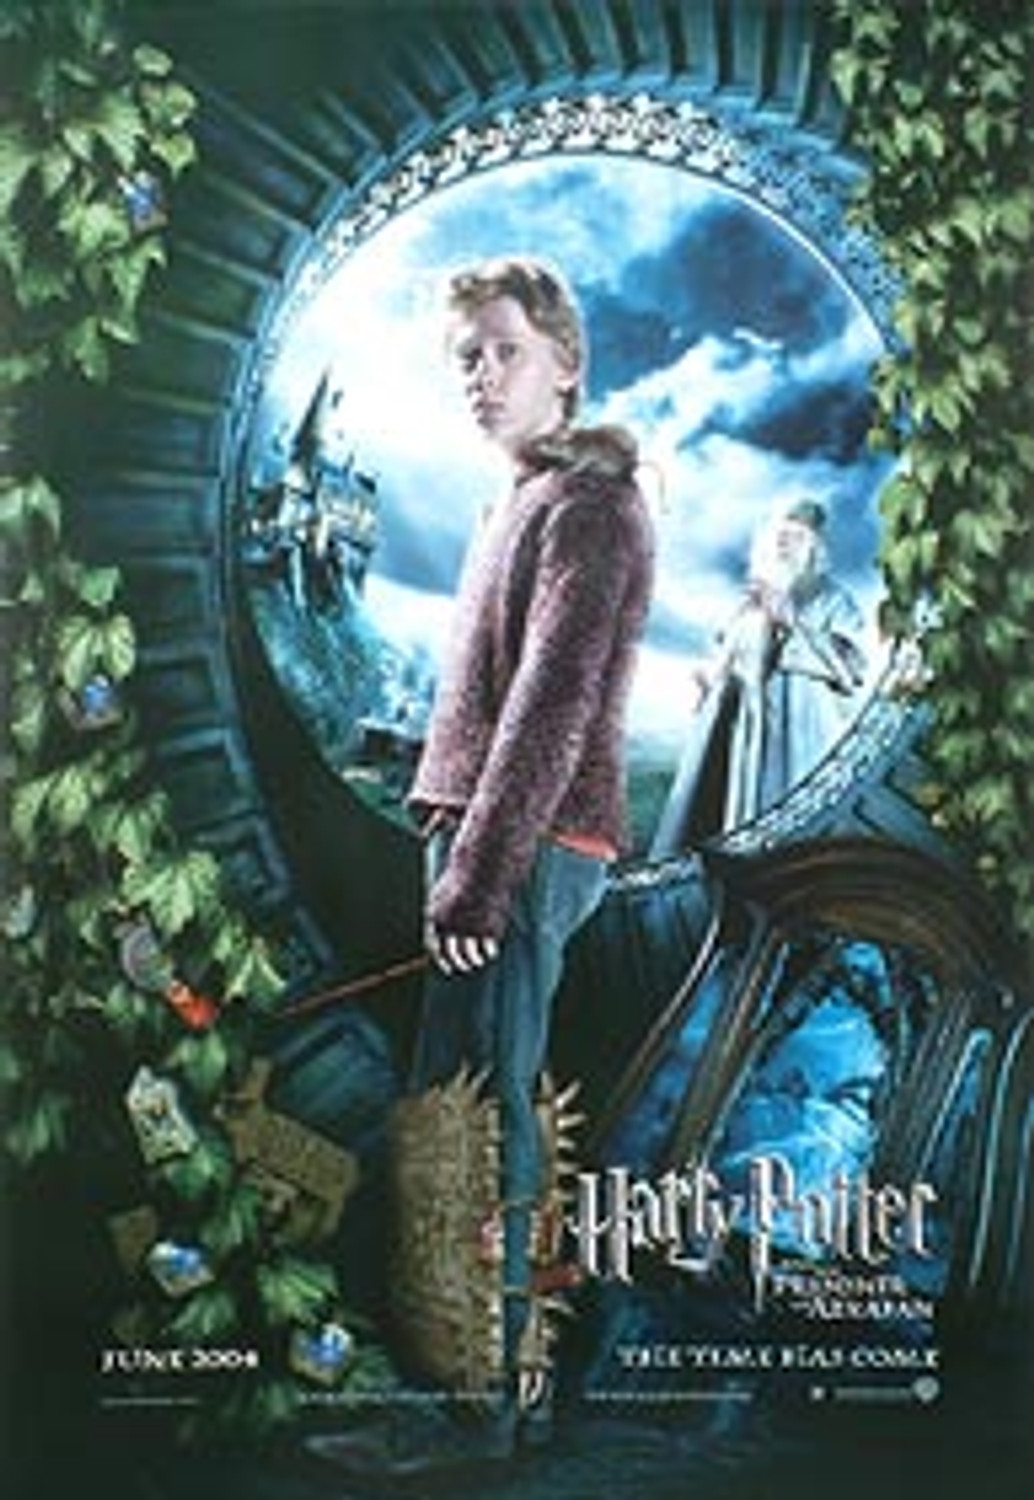 HARRY POTTER AND THE PRISONER OF AZKABAN (Ron Reprint) POSTER buy movie  posters at  (SSE1037-502723)